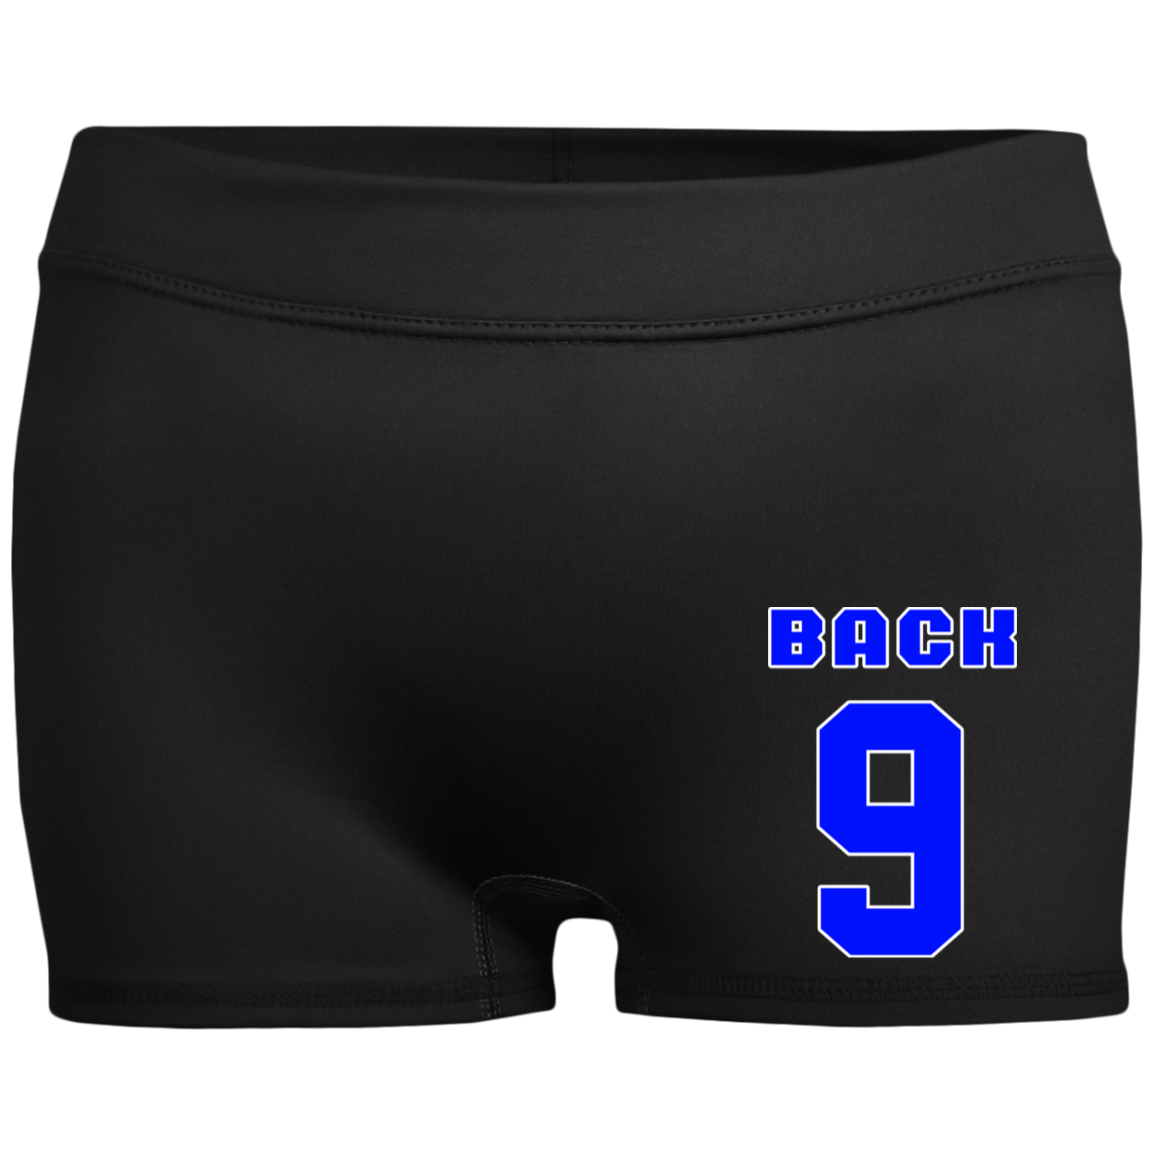 OPG Custom Design #17. Back 9. Ladies' Fitted Moisture-Wicking 2.5 inch Inseam Shorts